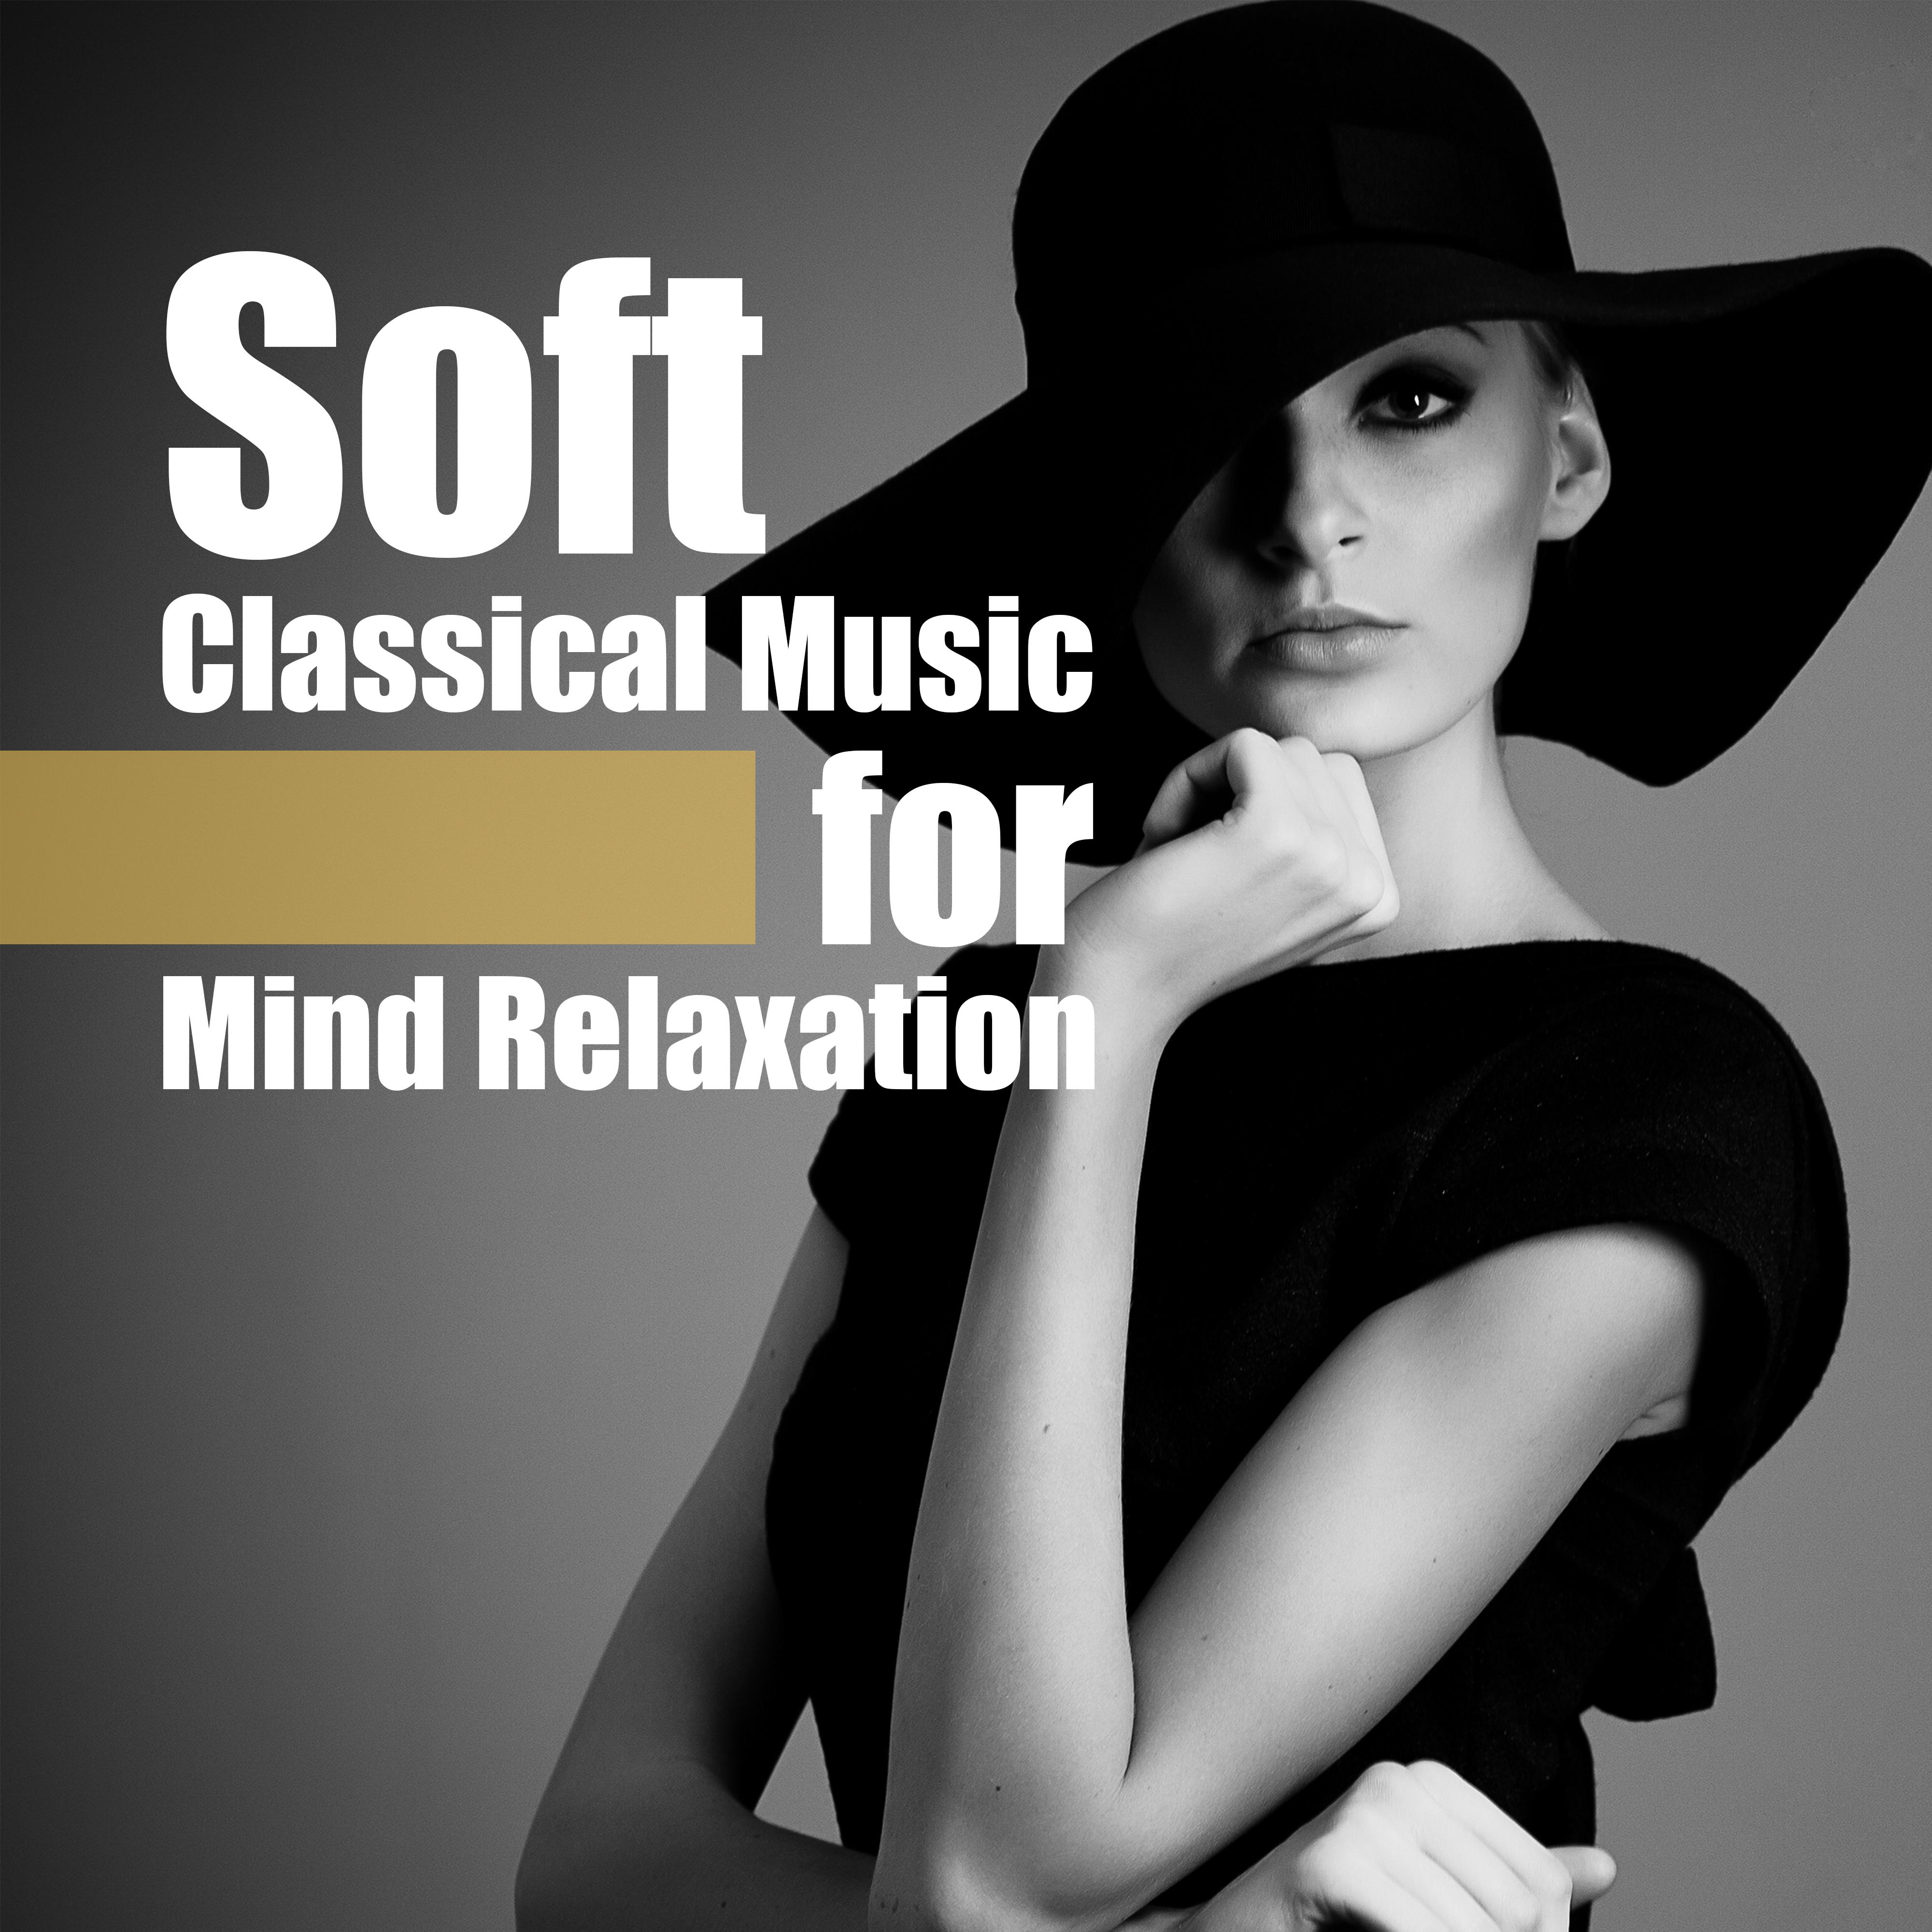 Soft Classical Music for Mind Relaxation